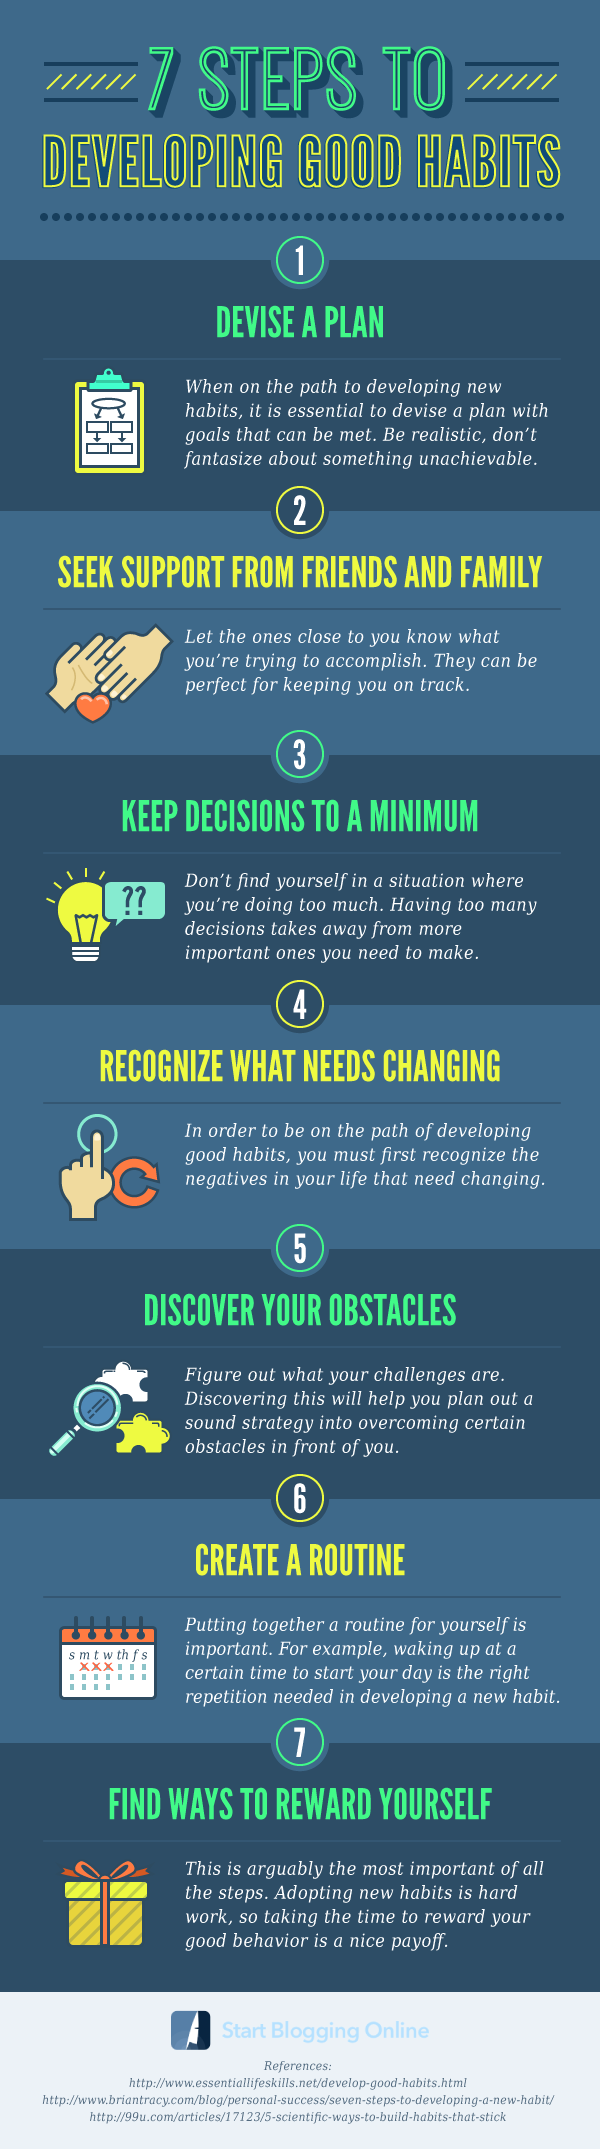 7-steps-to-developing-good-habits